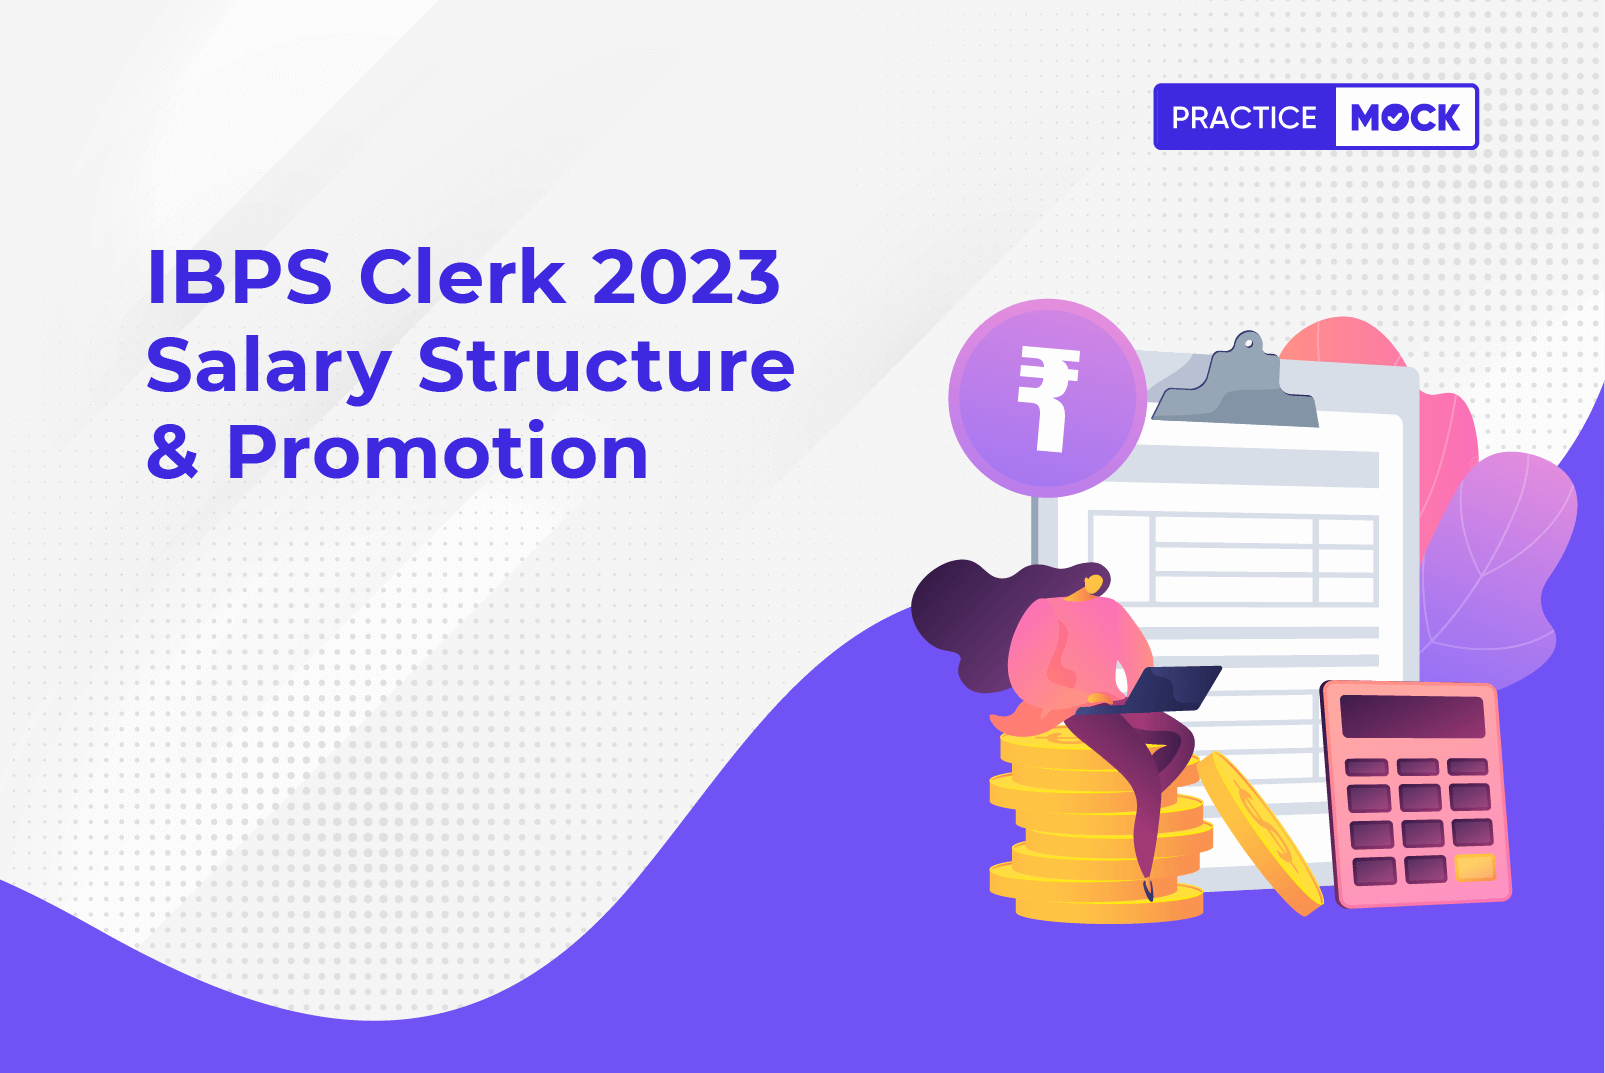 IBPS Clerk Salary Structure